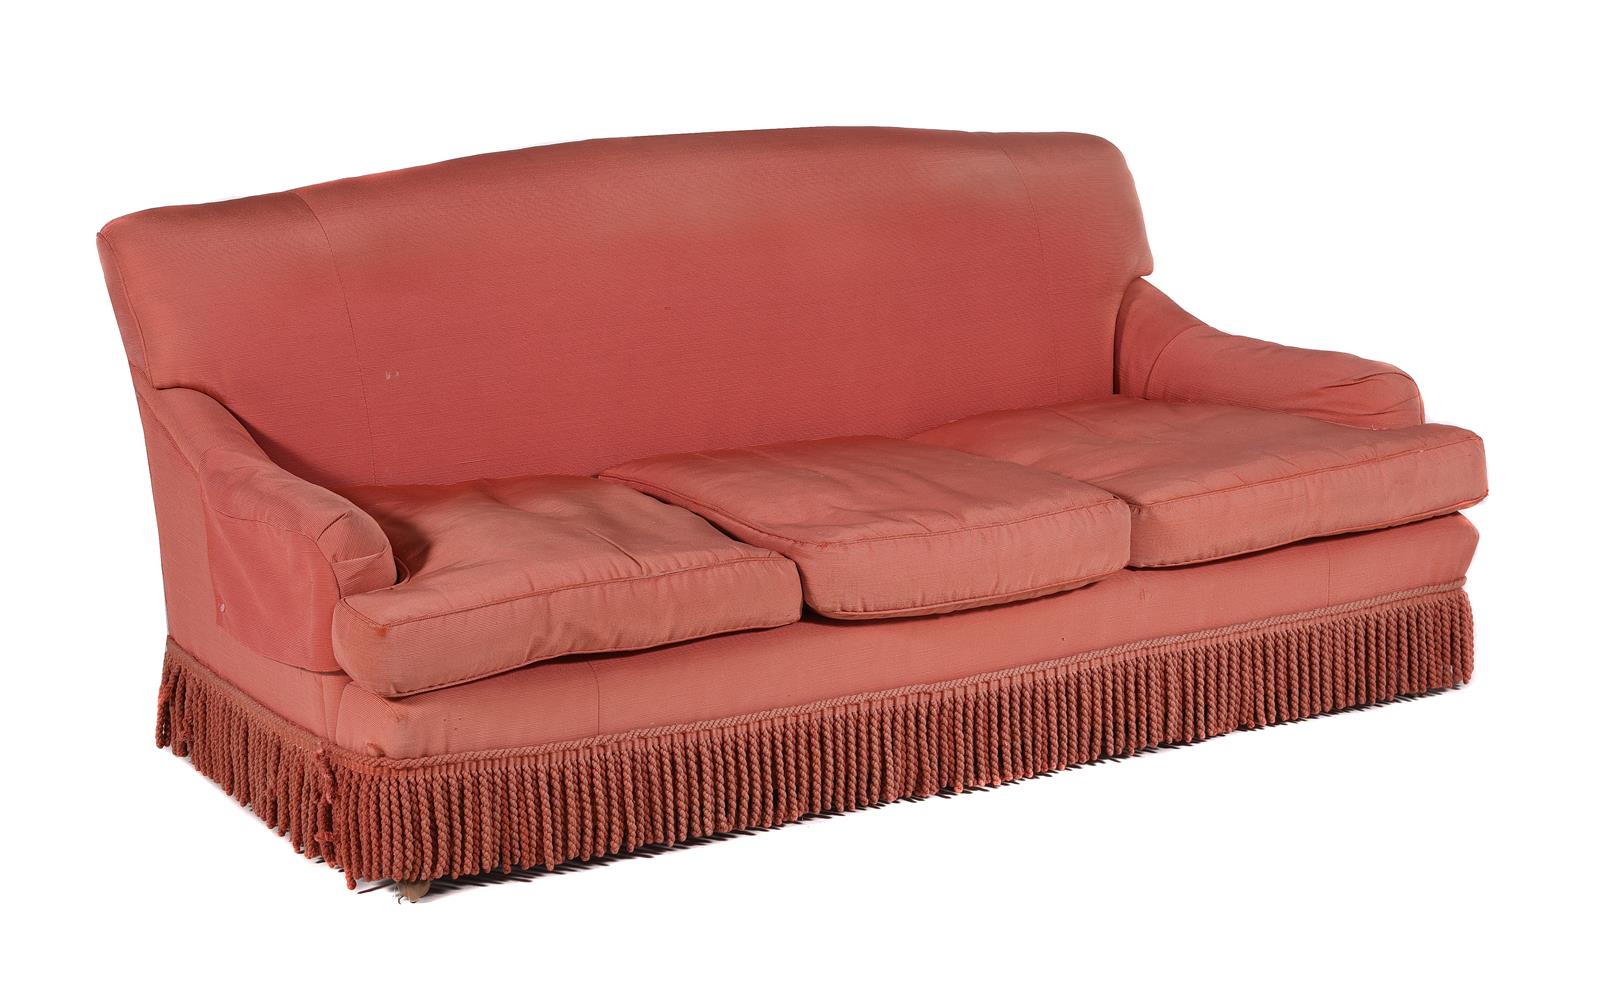 A PAIR OF CORAL PINK UPHOLSTERED THREE SEAT SOFAS